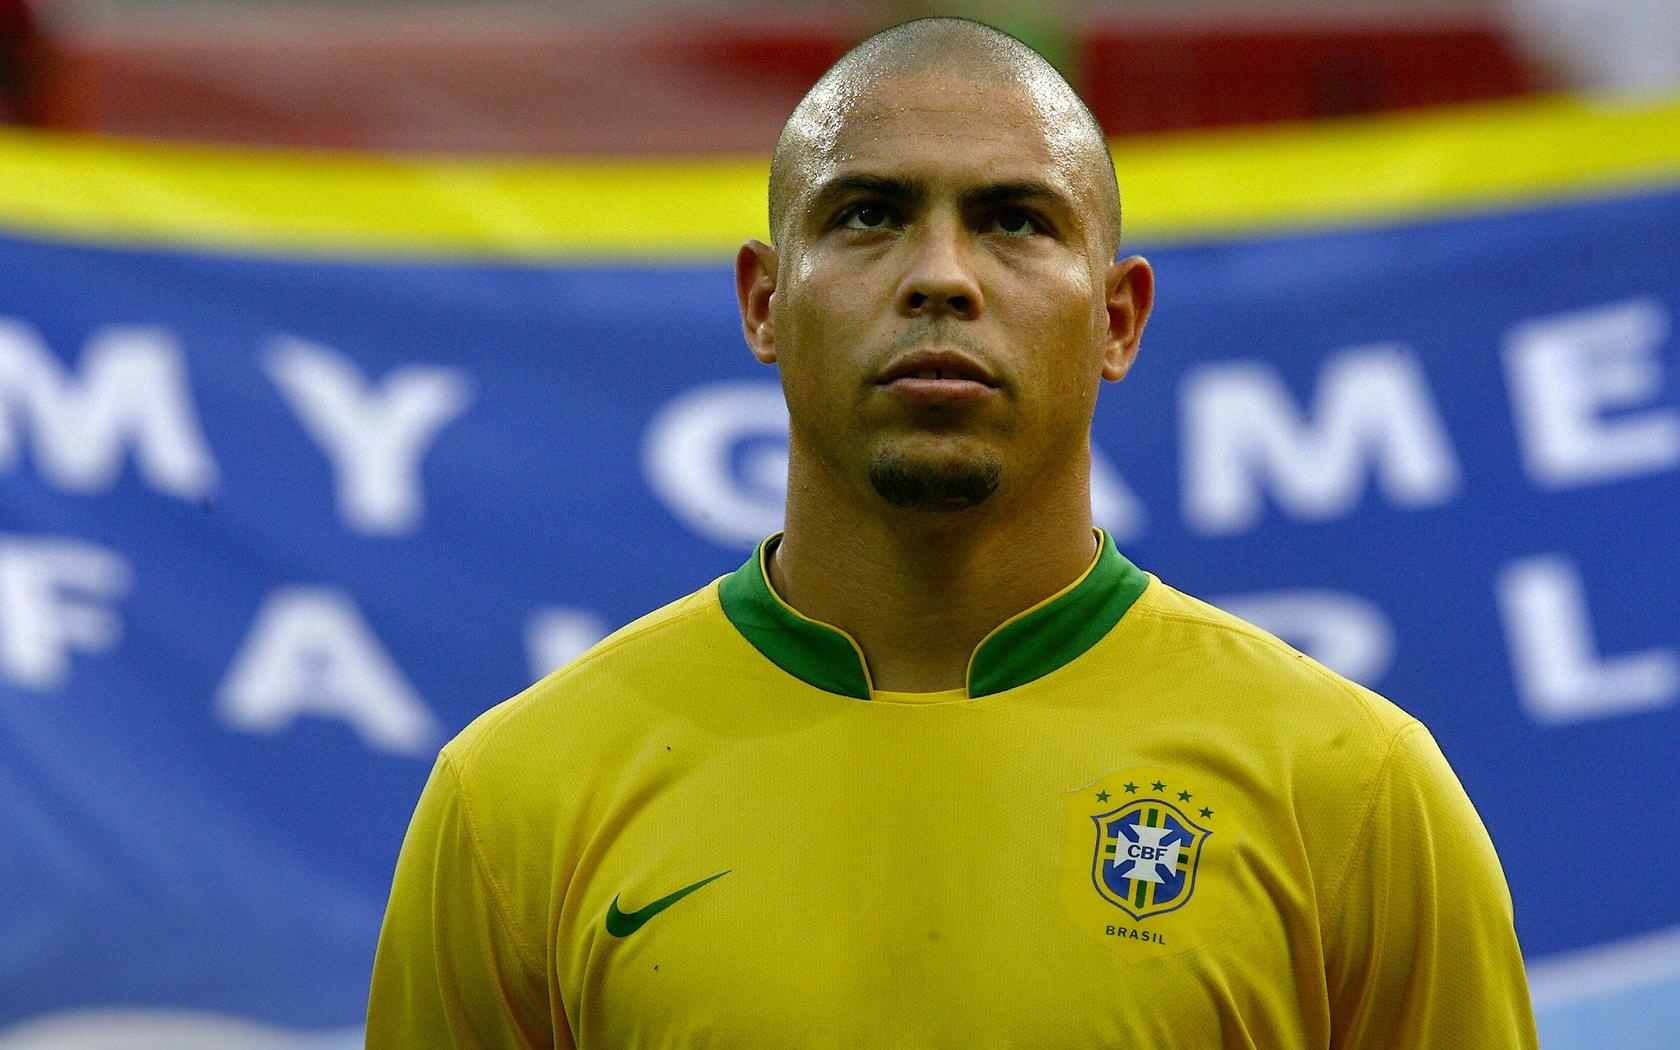 AS USA couldn't let the day go by without wishing Ronaldo Luís Nazário de Lima, Ronaldo, a Happy Birthday! 39 today!